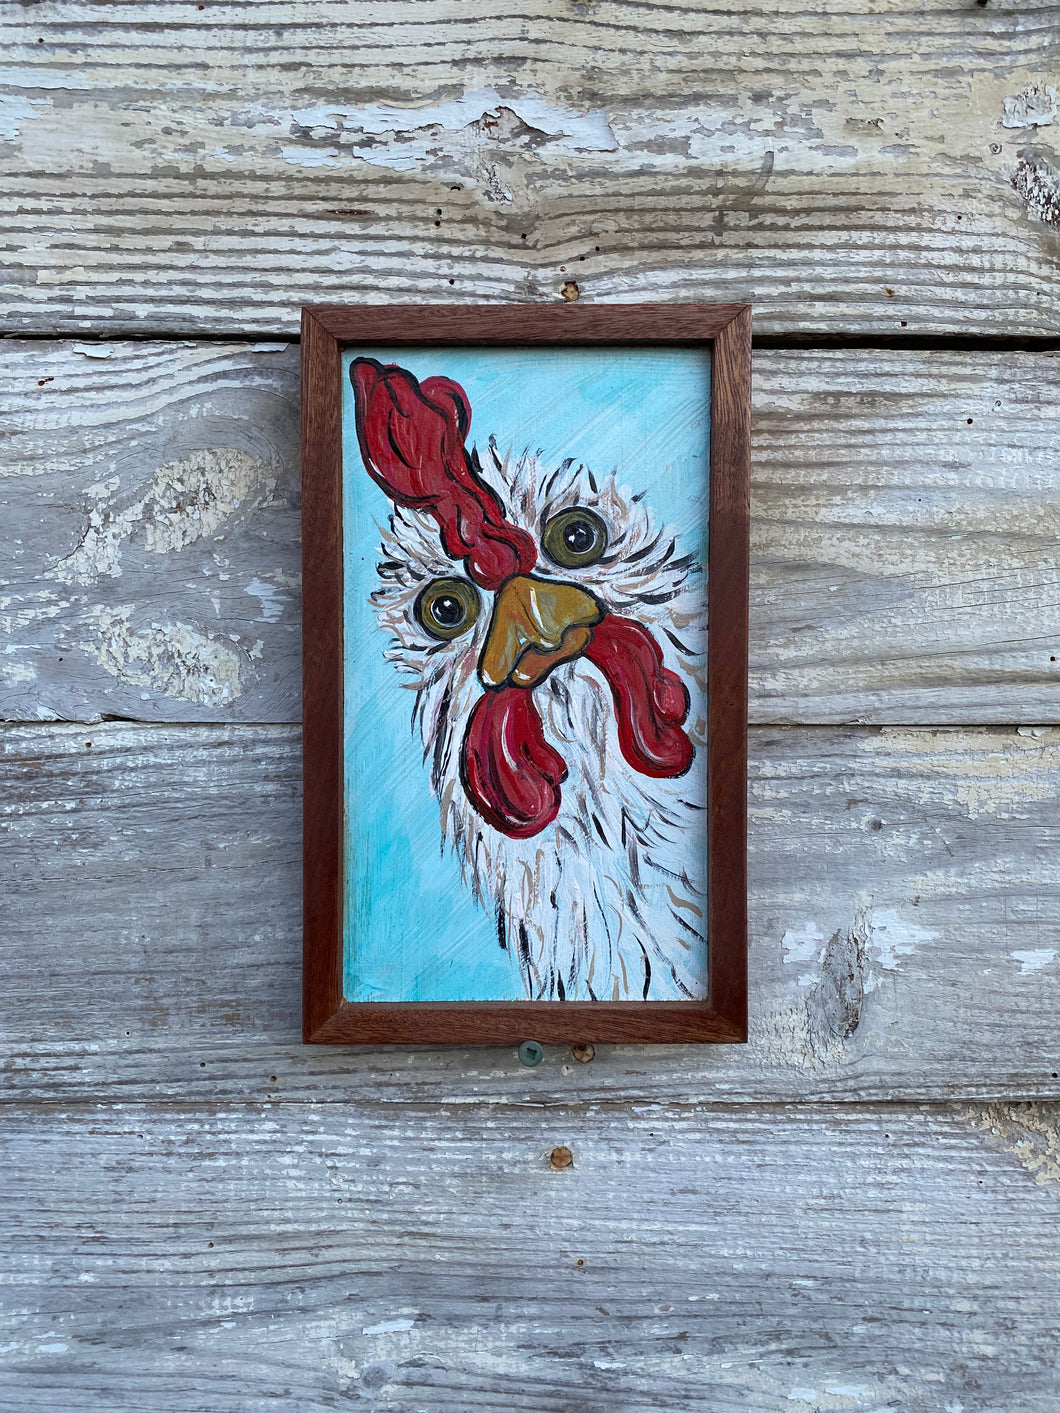 Curious Chicken #7 reclaimed wood painting